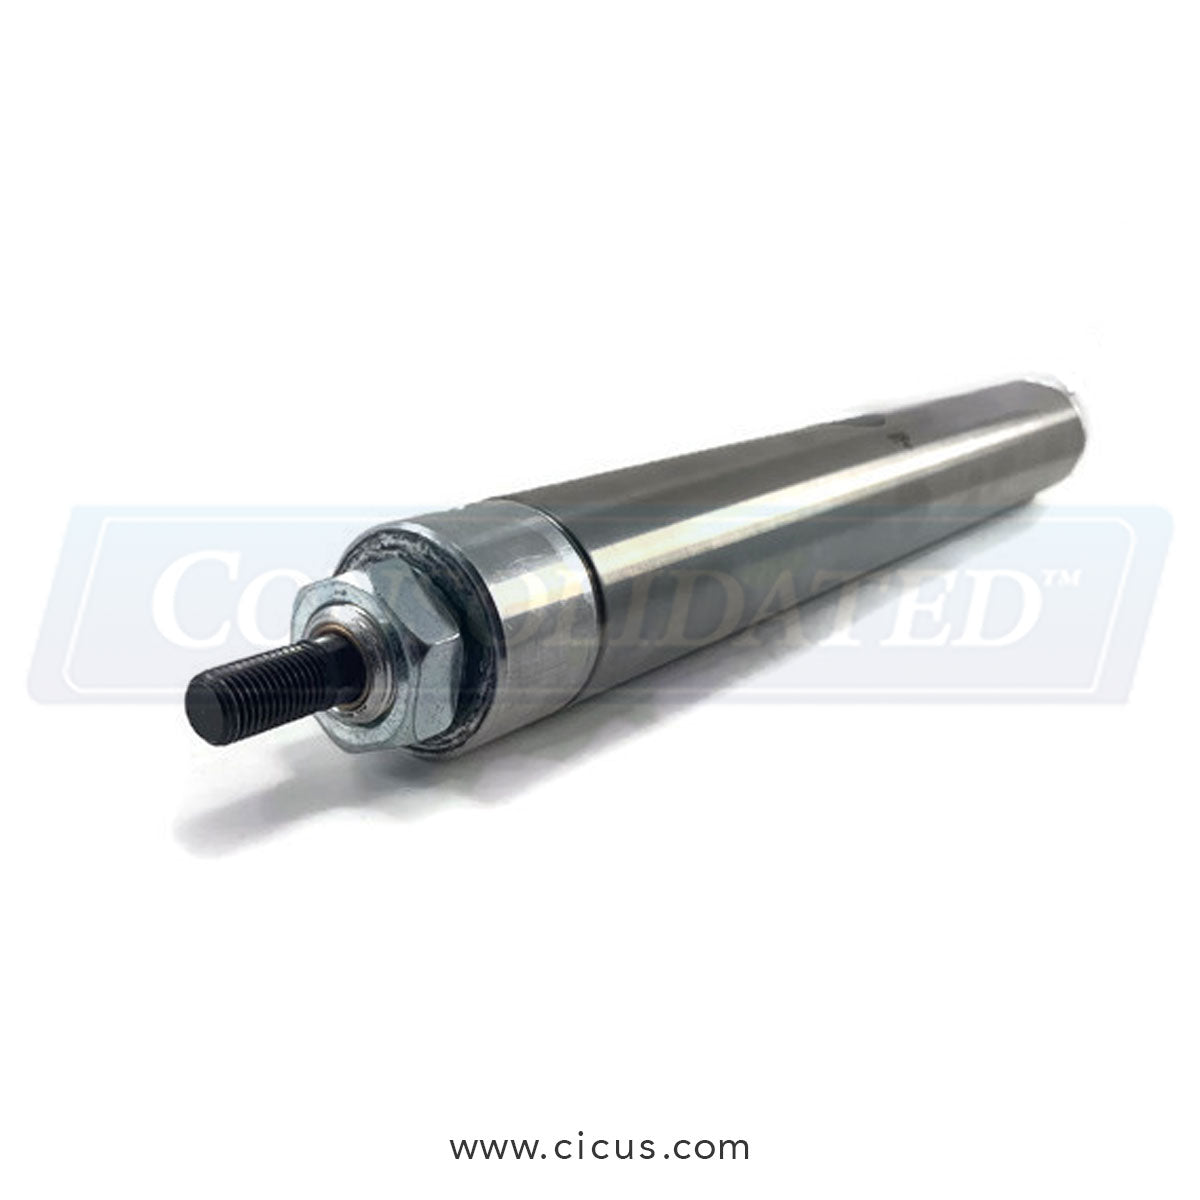 Bimba Stainless Air Cylinder - 1-1/2" Bore (1710D)